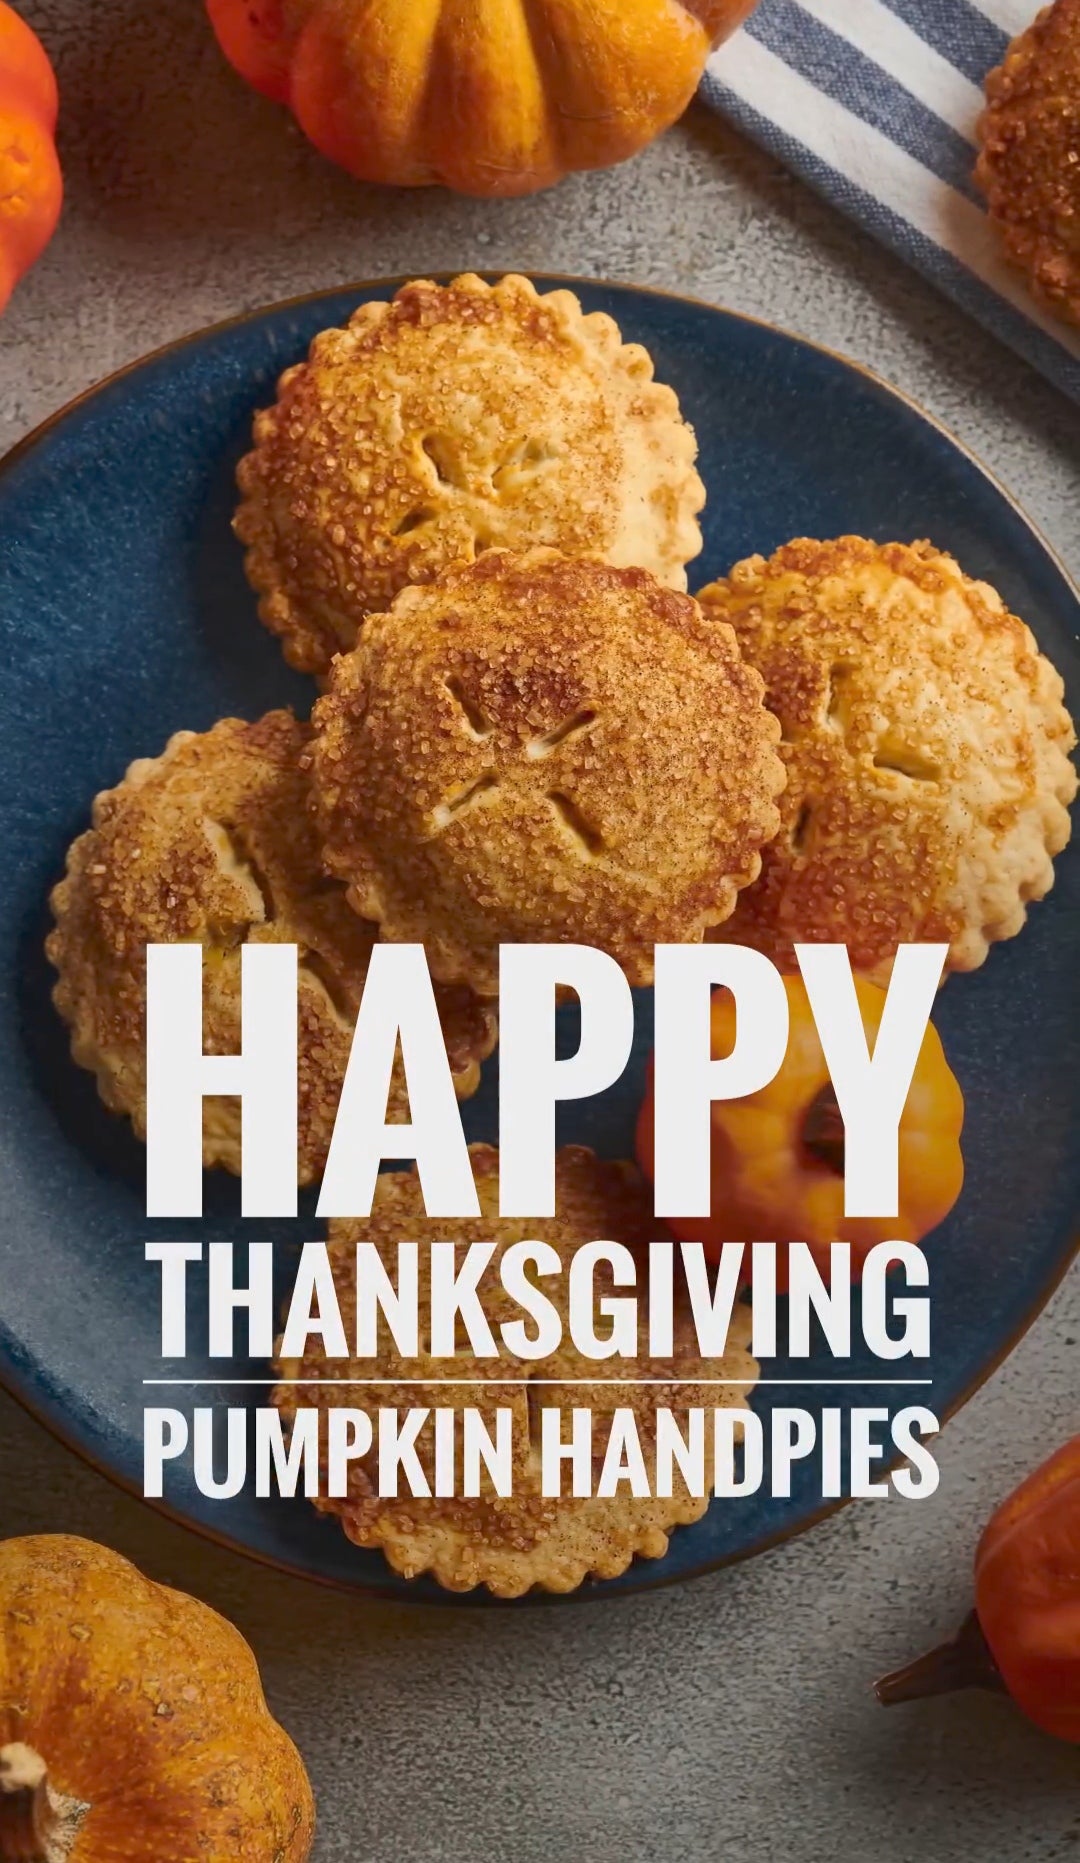 ⁠ PUMPKIN HANDPIES in your Fritaire Air fryer for Thanksgiving